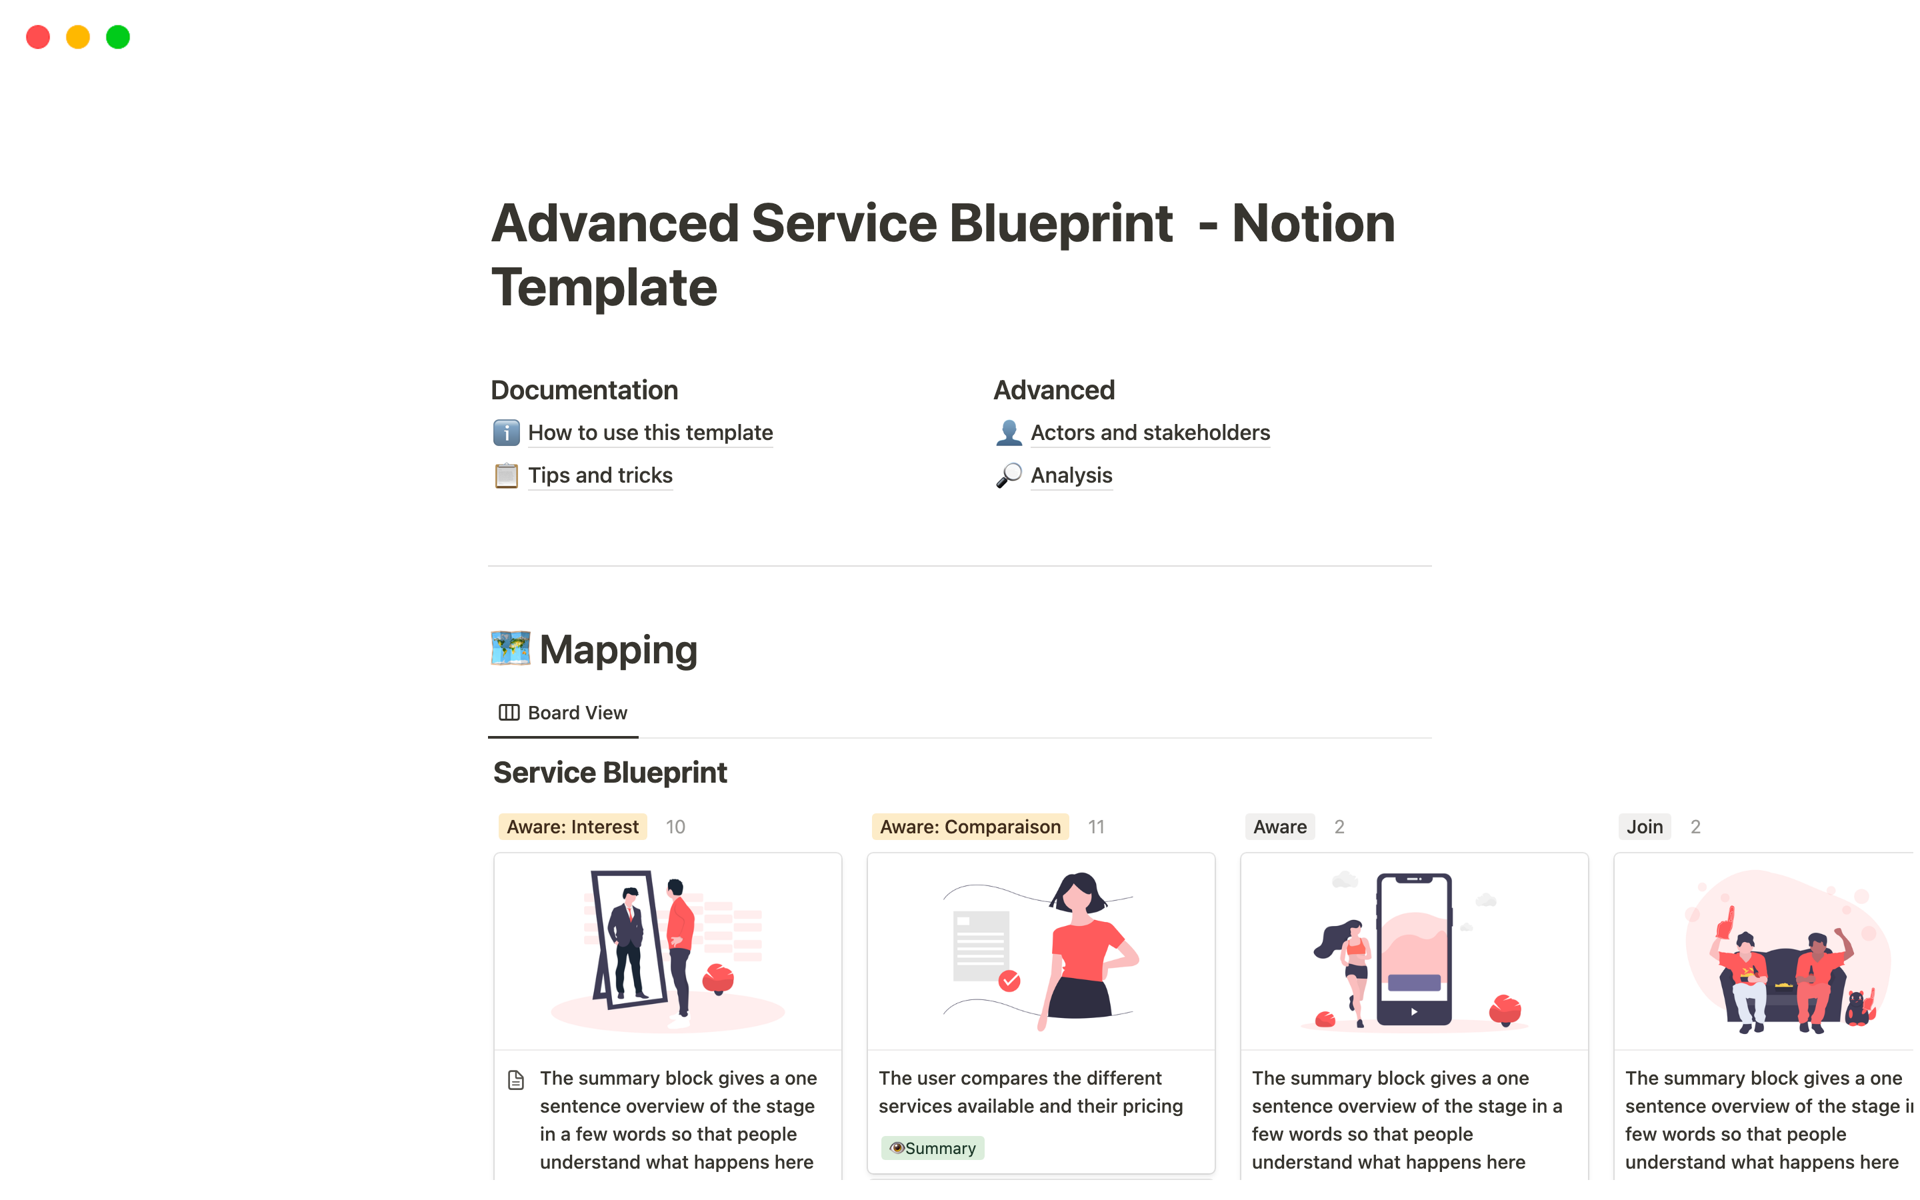 Create a complete Service Blueprint with automated analysis features directly in Notion.